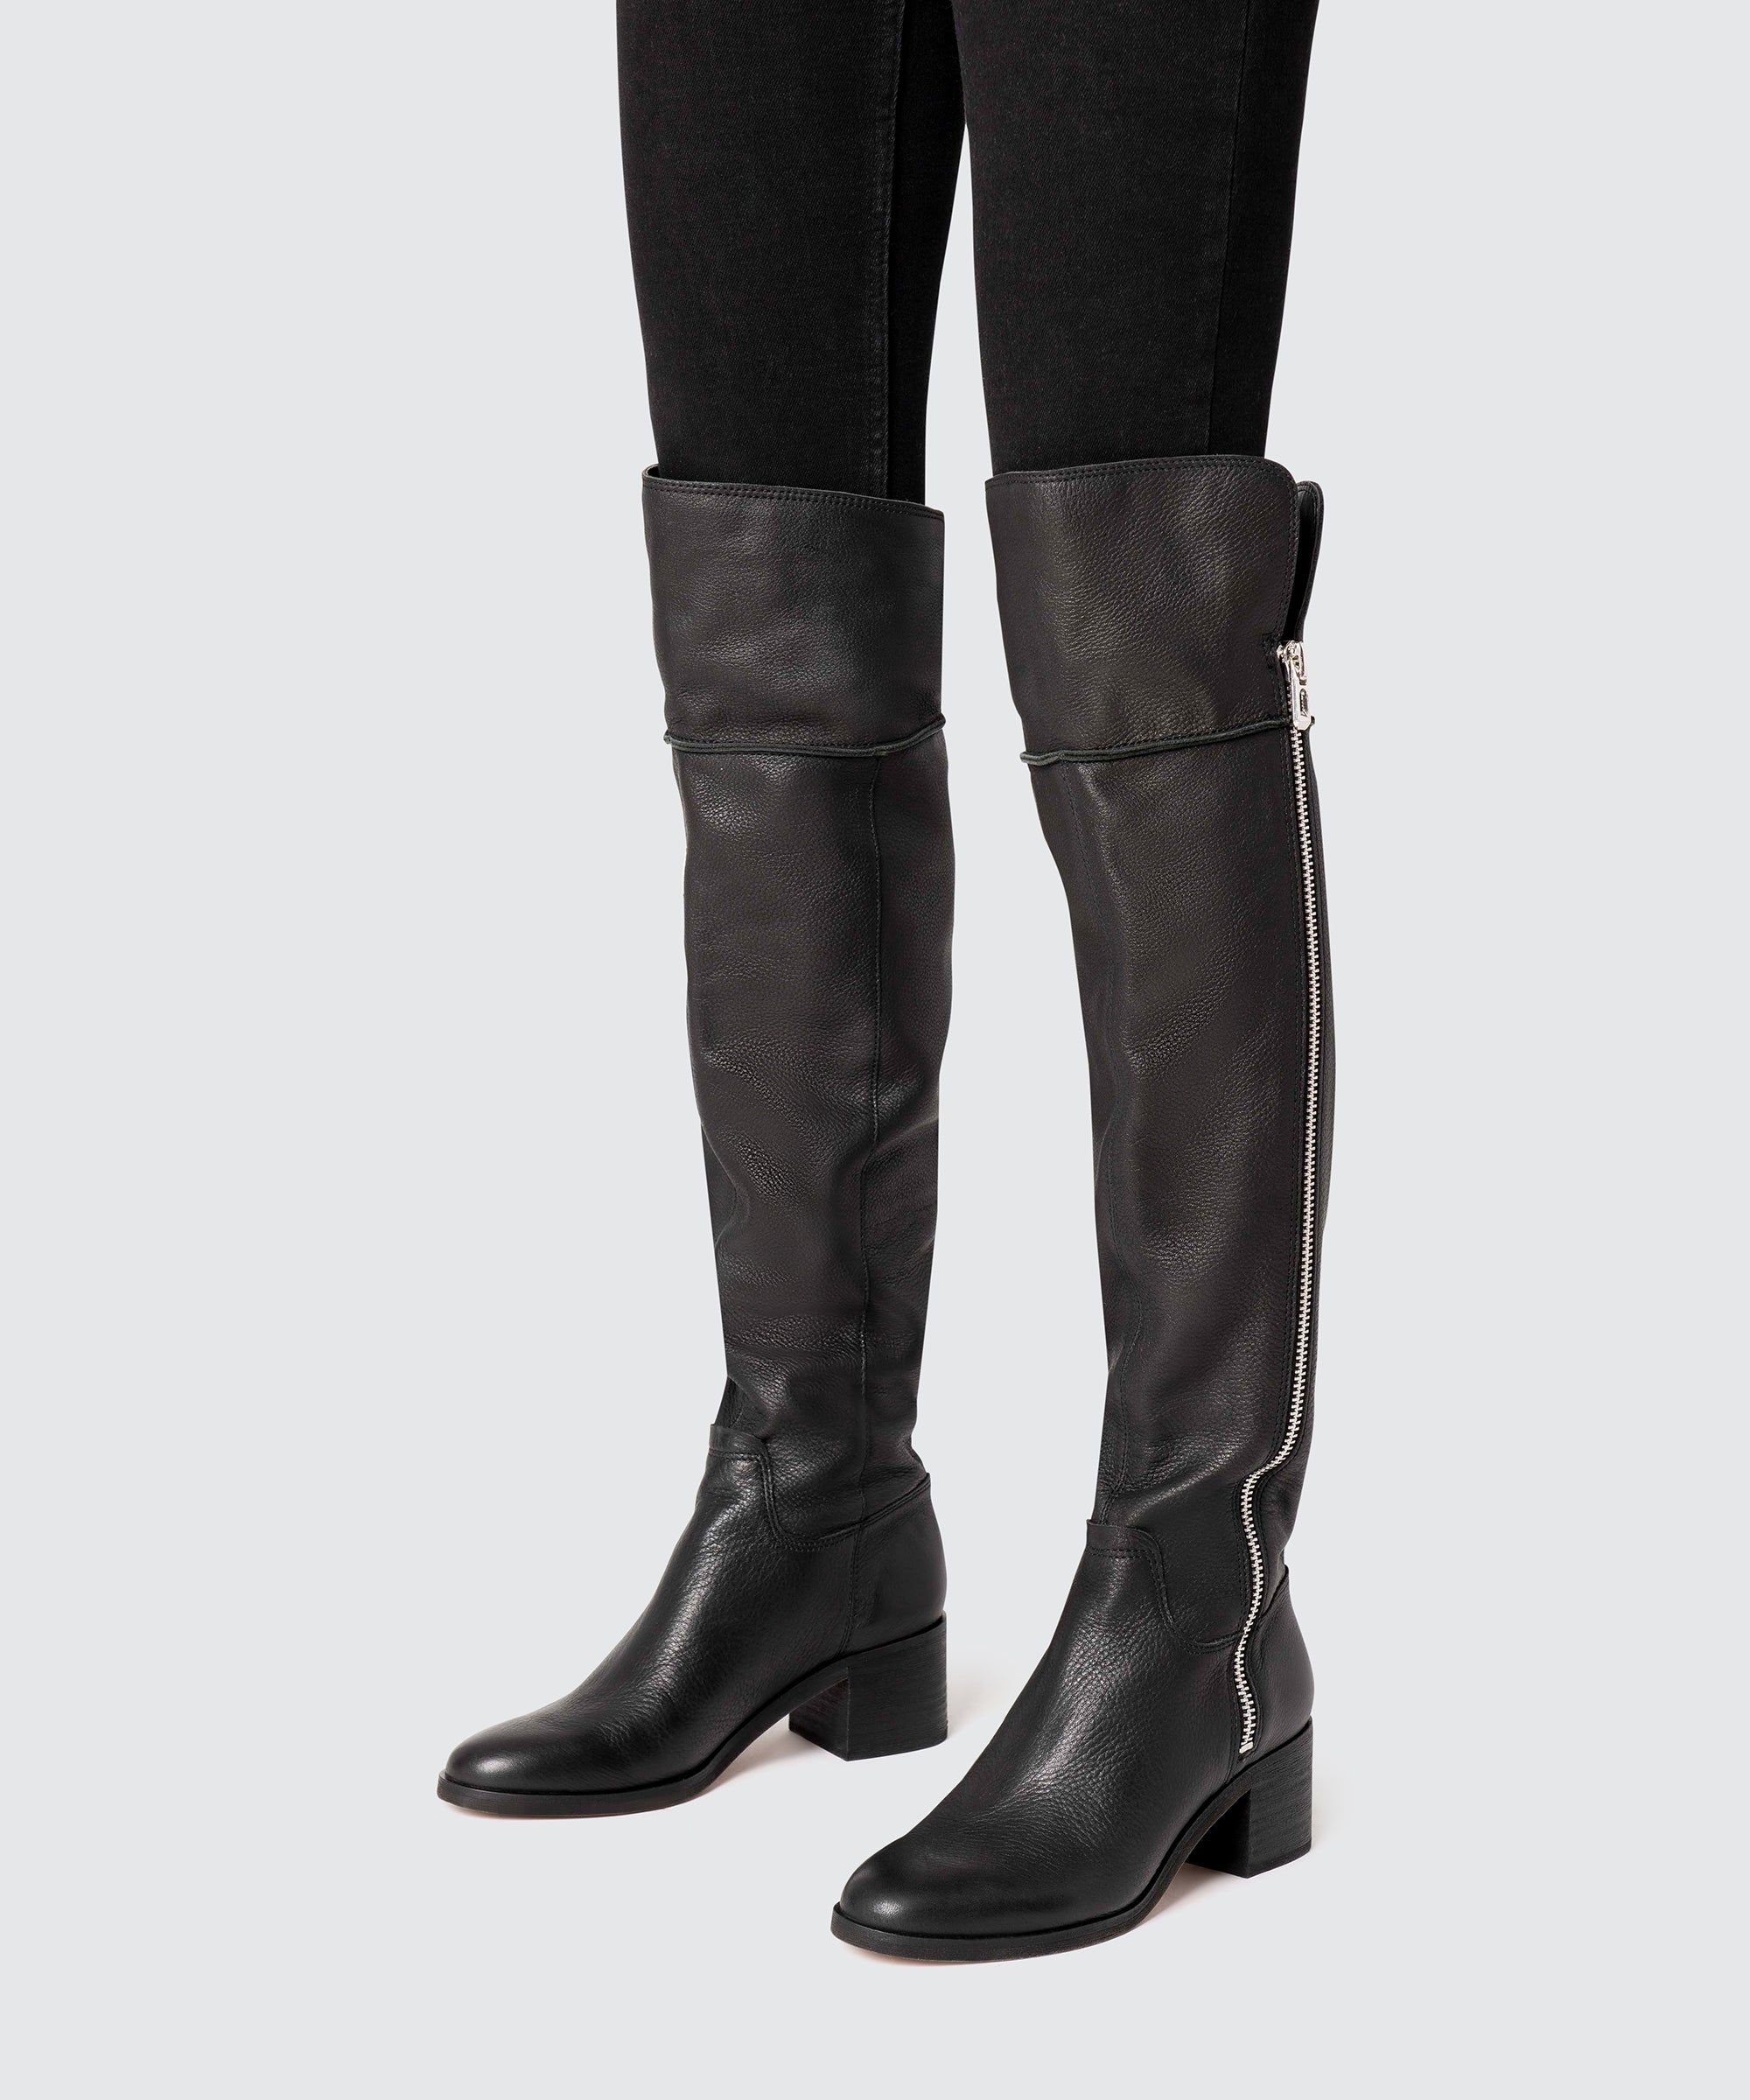 dolce vita riding boots